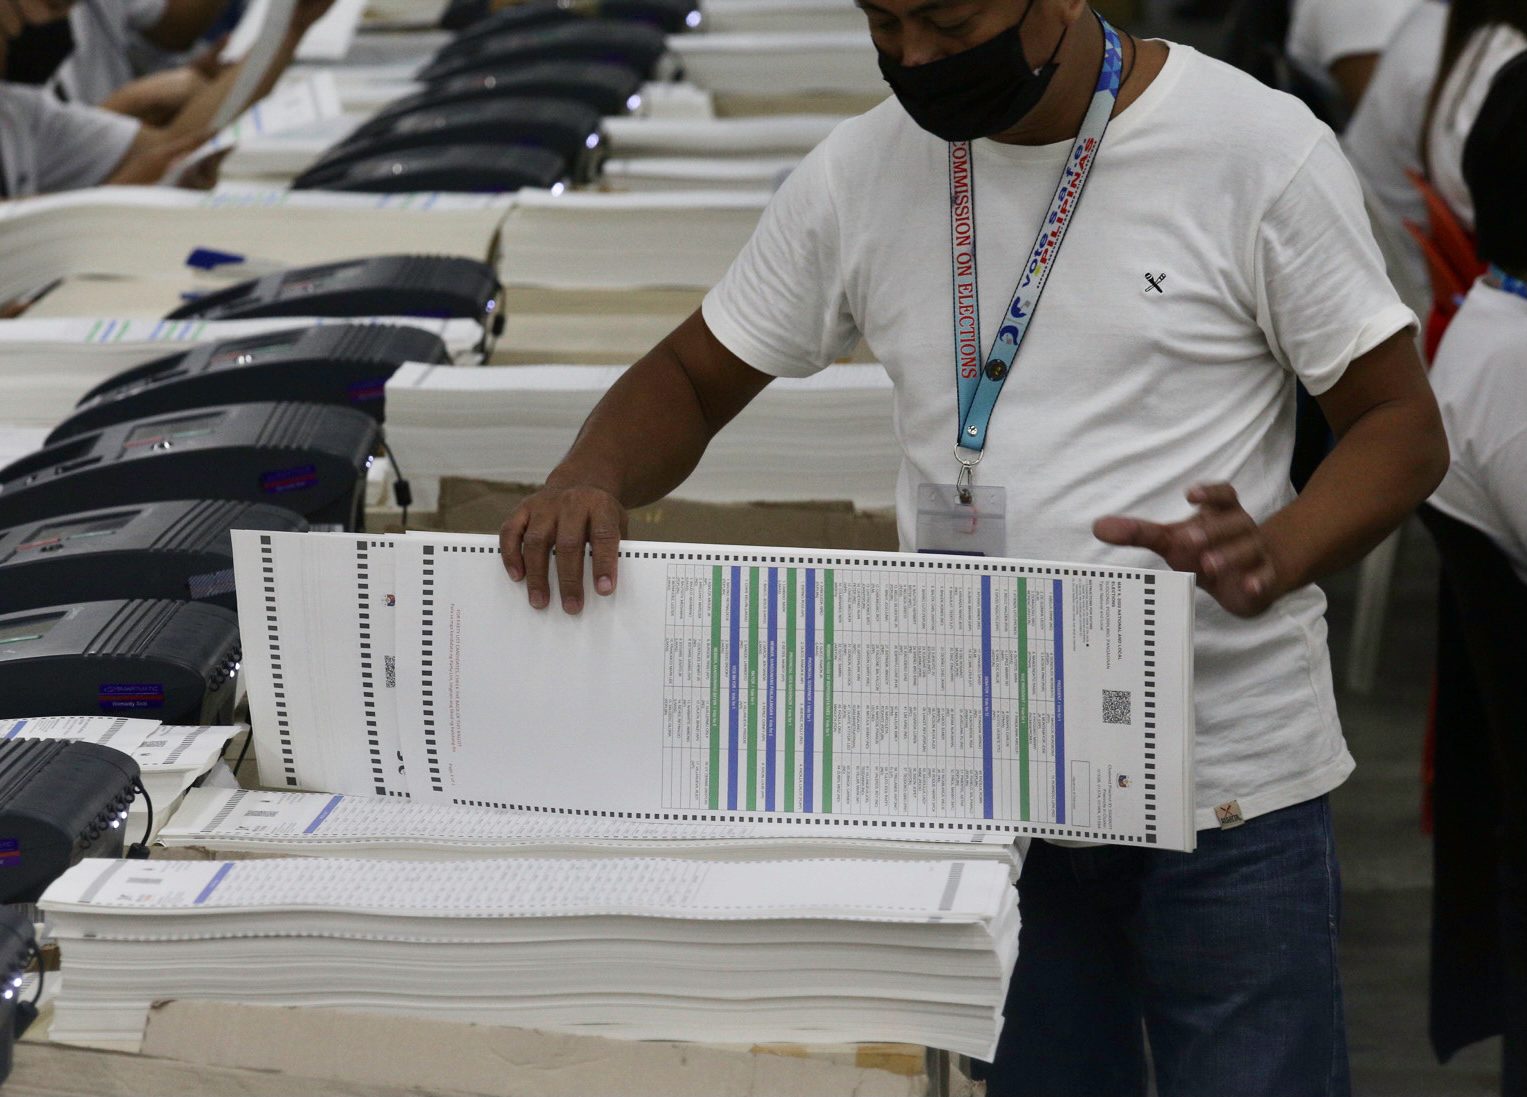 51% of 67.4 million ballots for 2022 ready for shipment